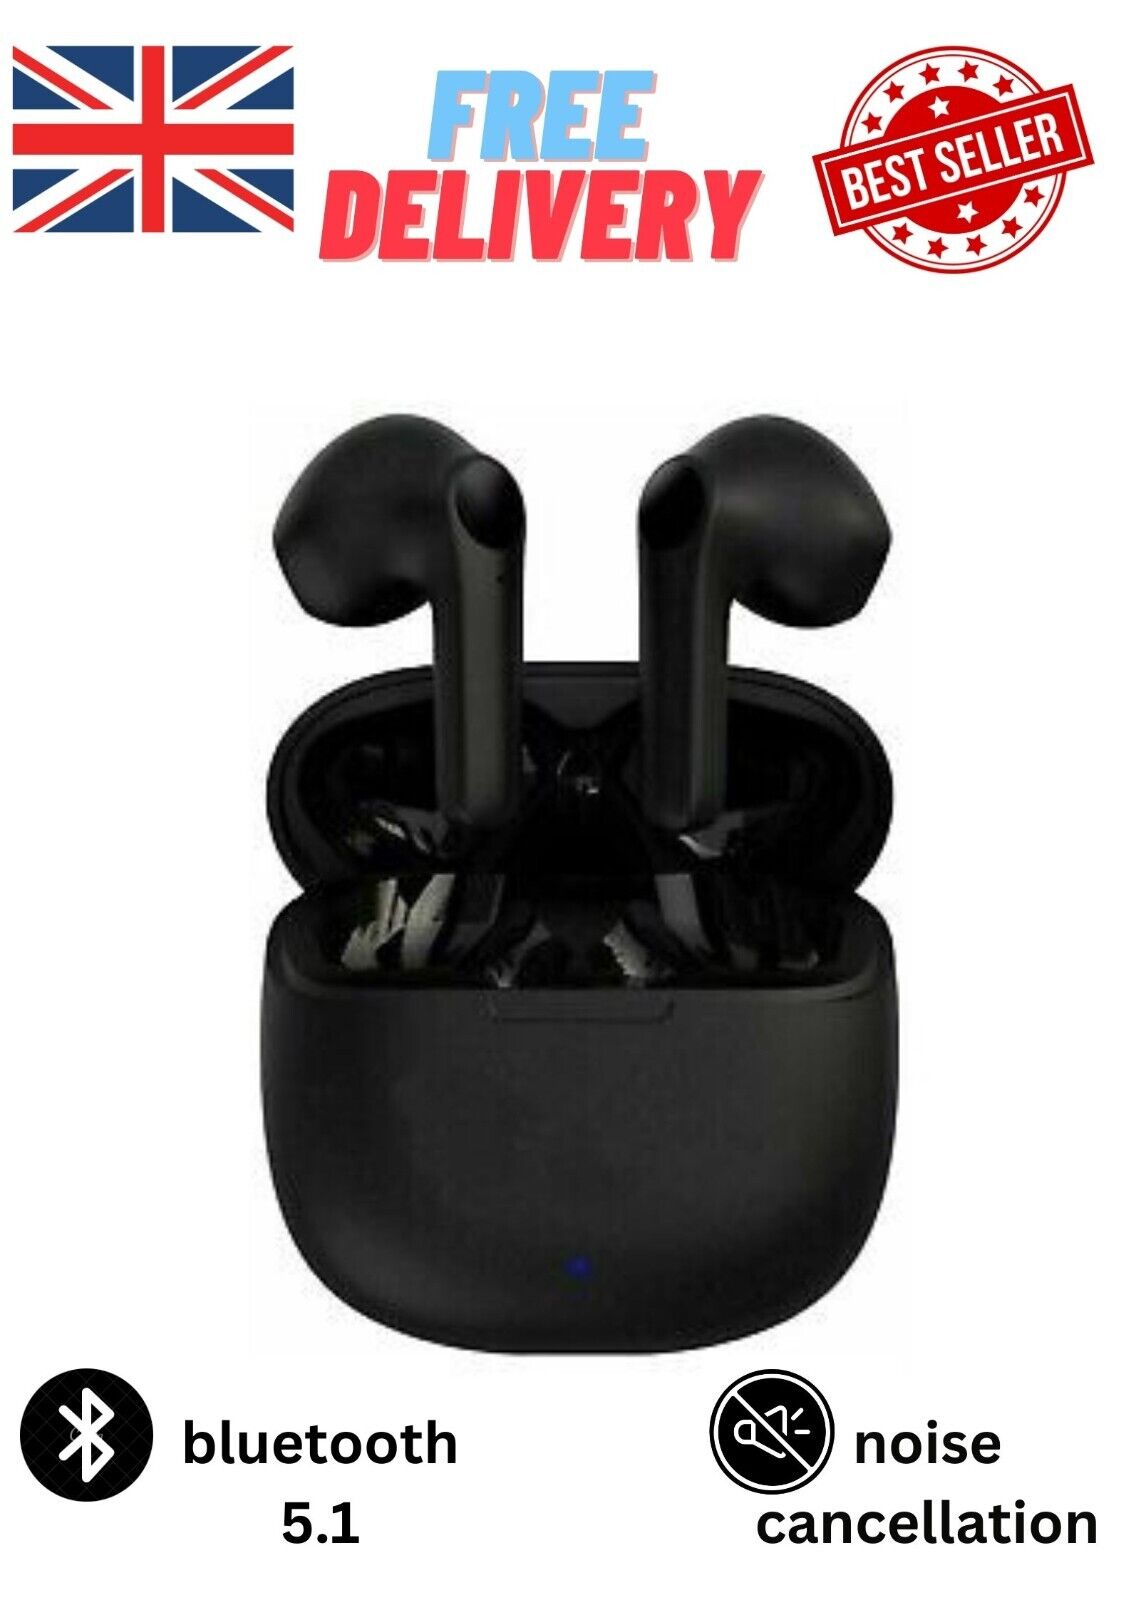 Wireless Earbuds with Noise Cancellation